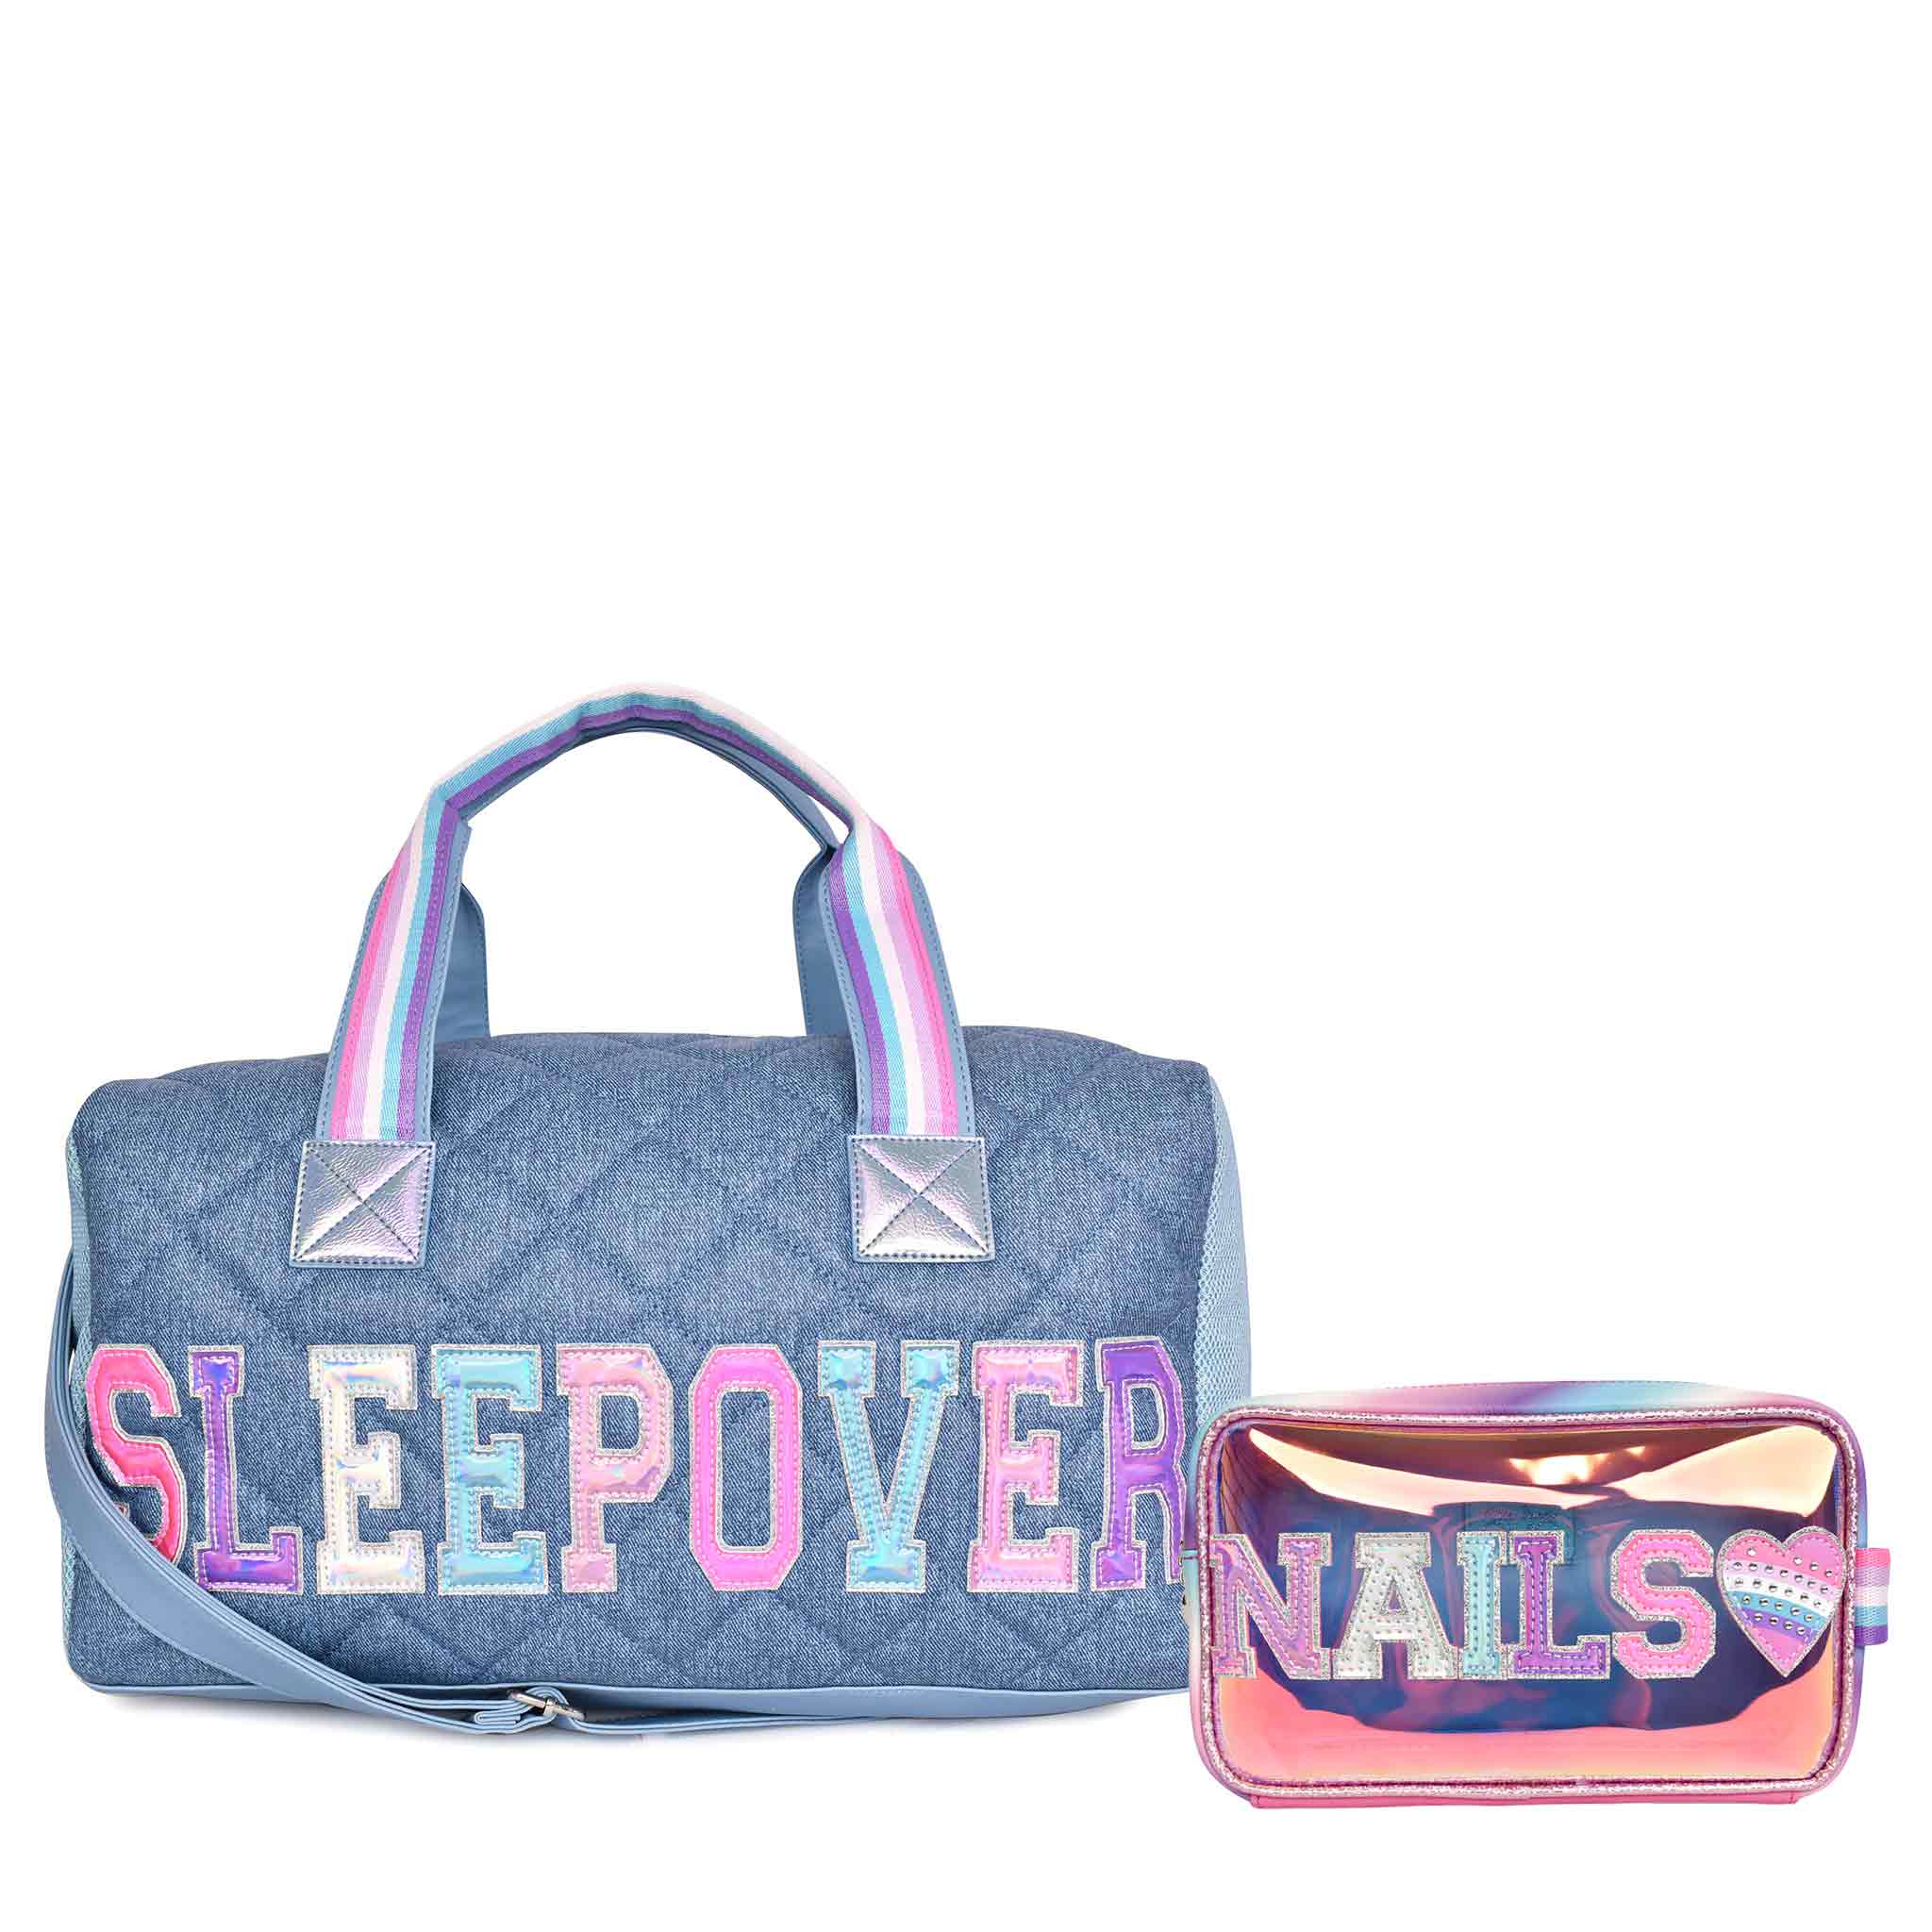 Front view of 'Sleepover' denim-printed large duffle bag and 'Nails' peekaboo pouch value set